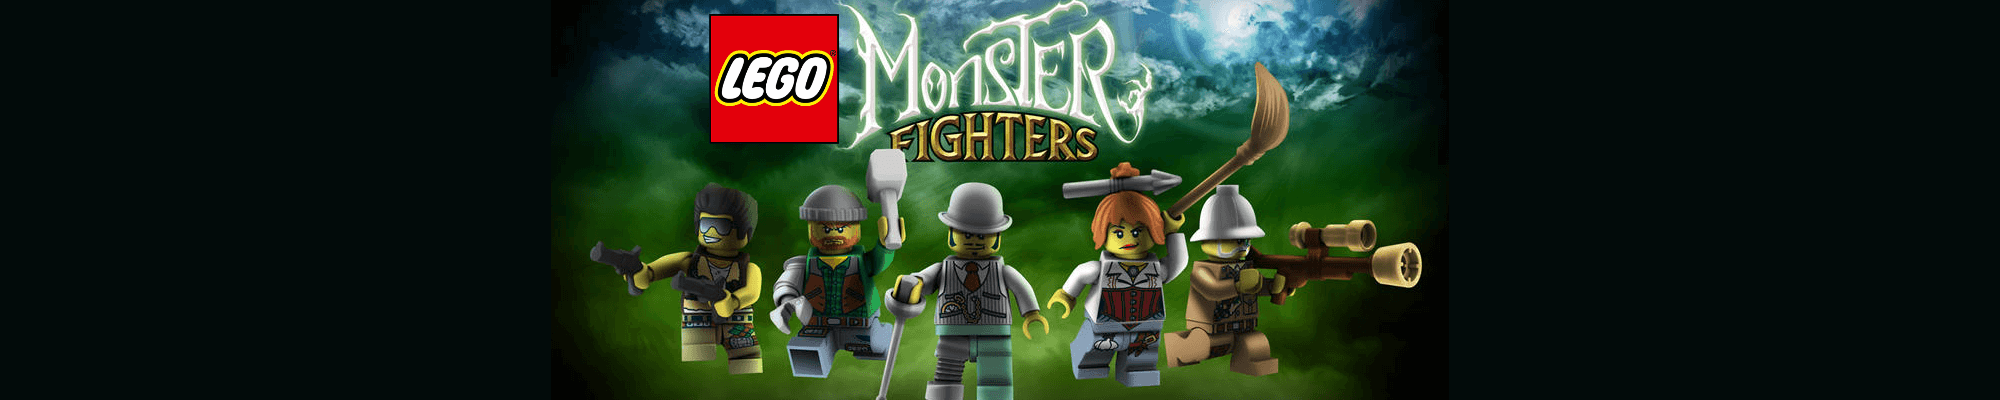 LEGO Monster Fighters NZ